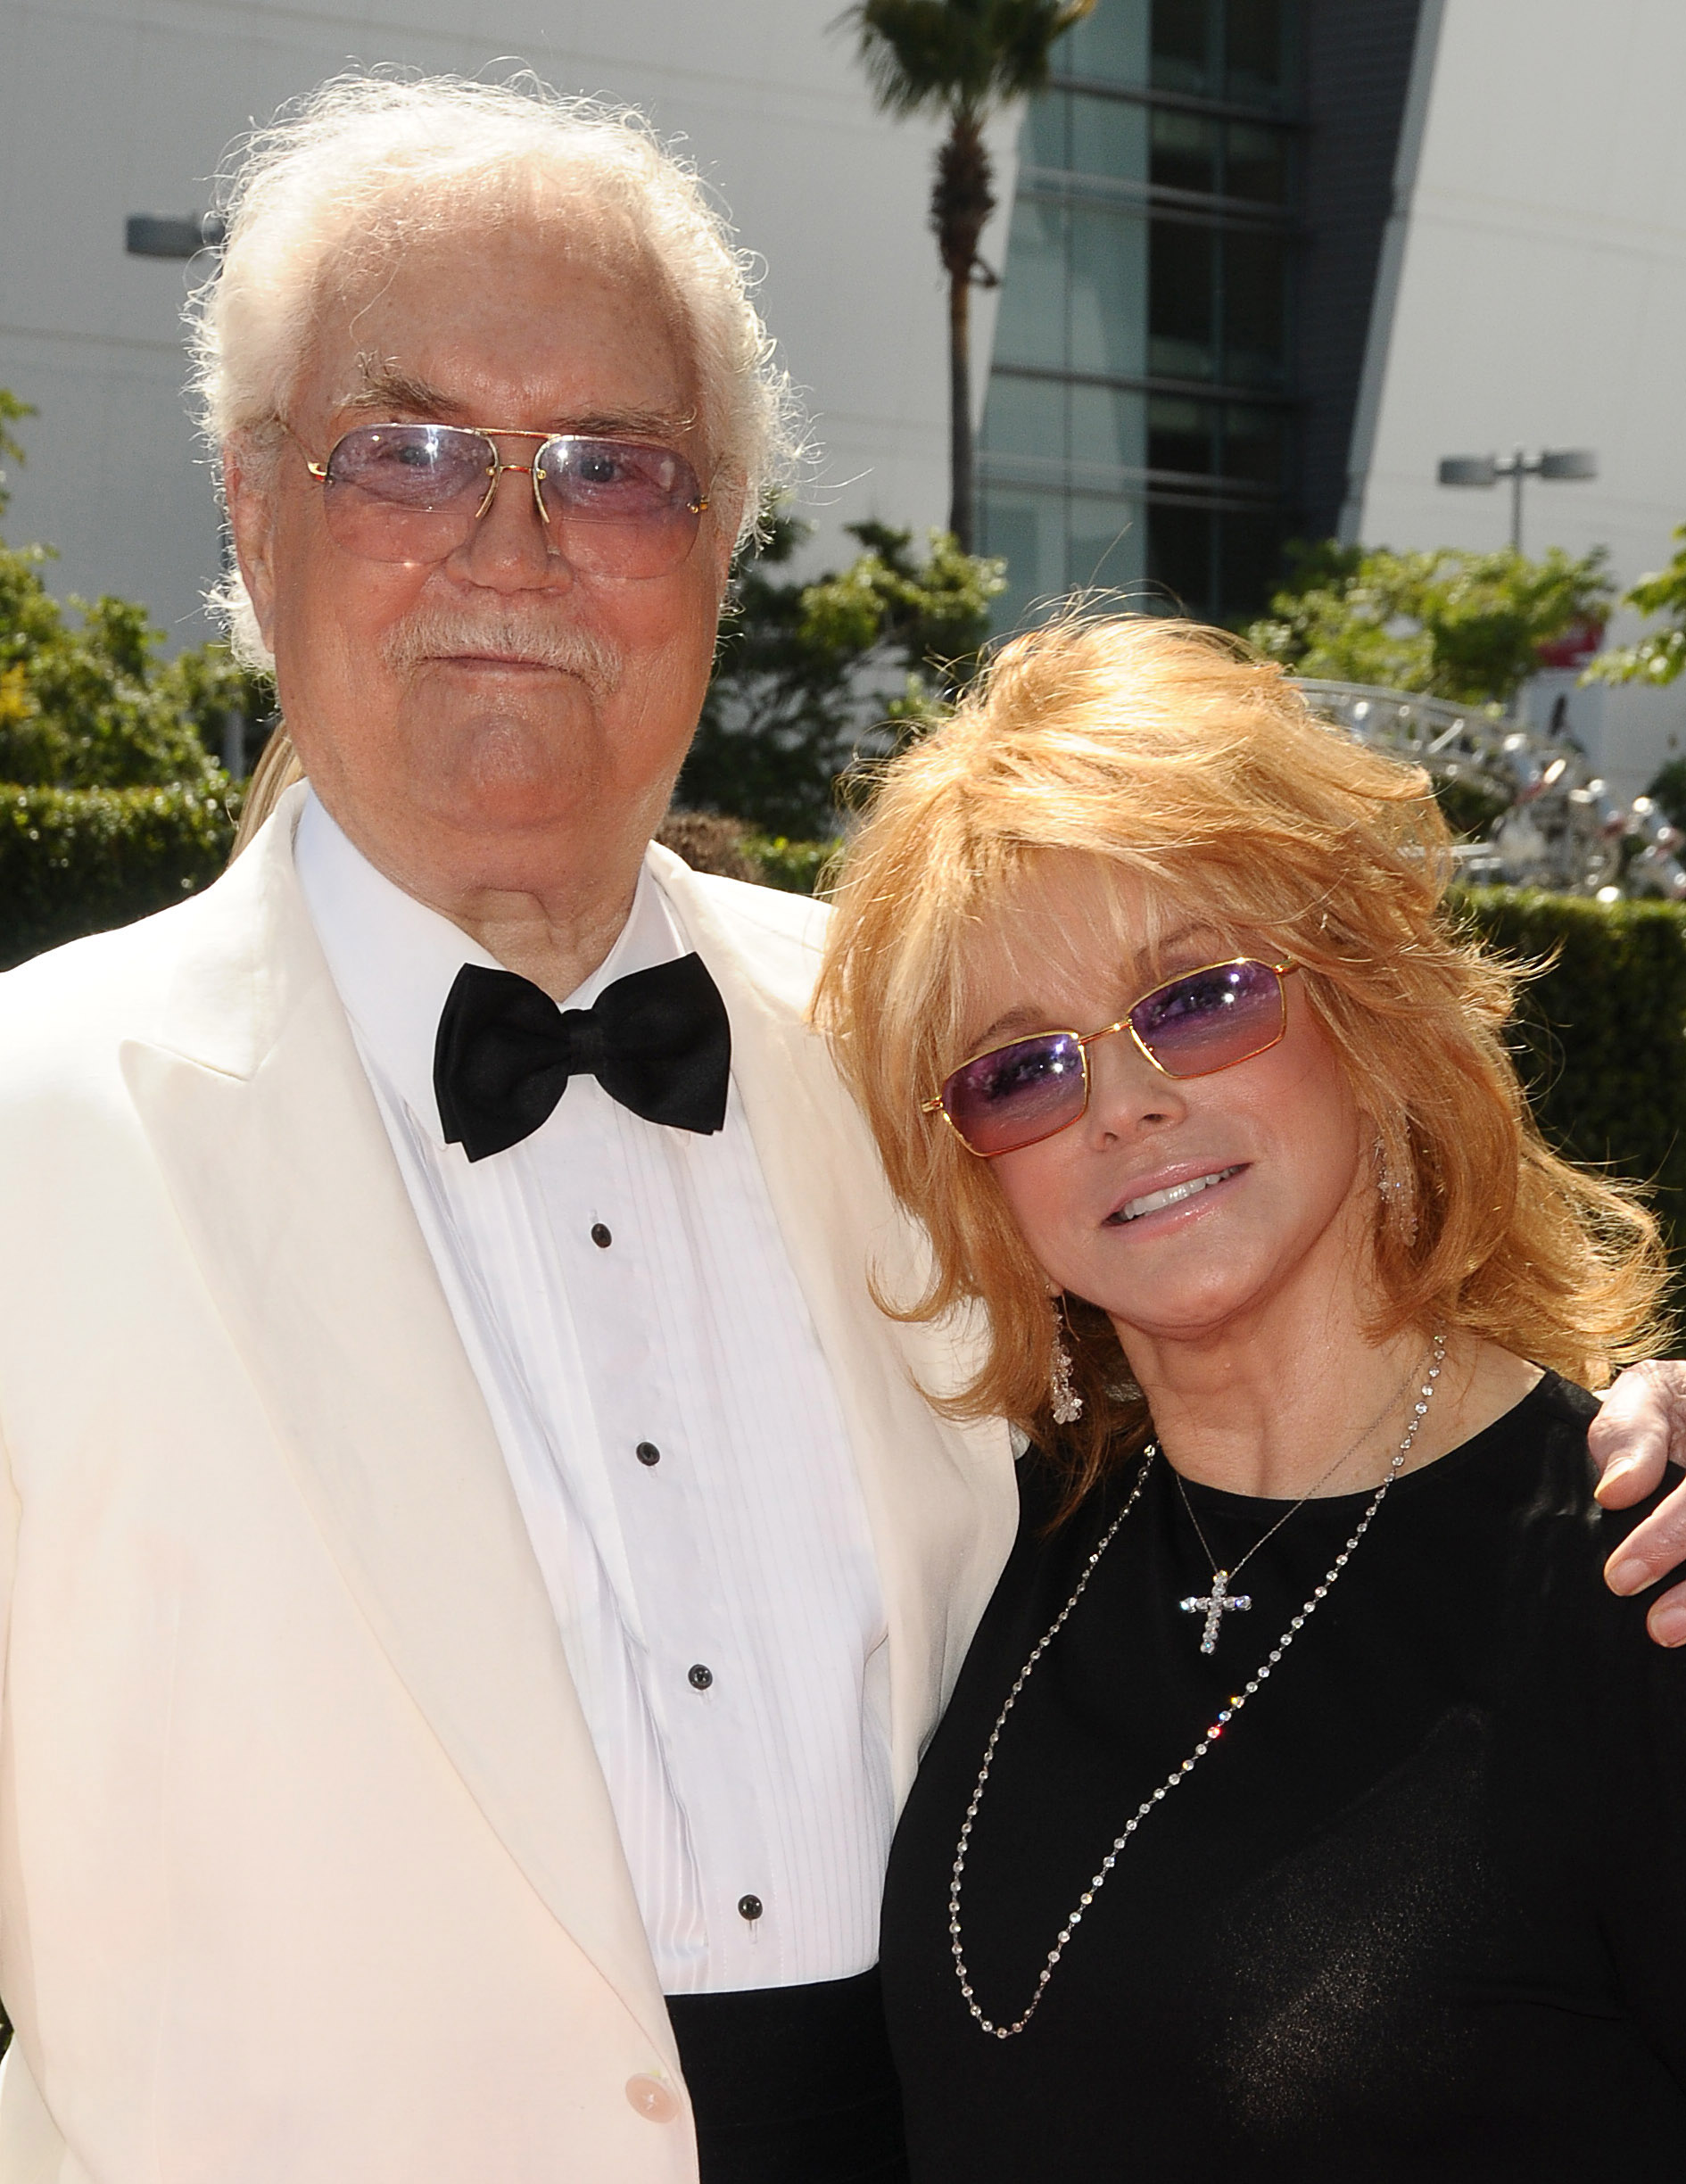 Roger Smith and Ann-Margret attend the 2010 Creative Arts Emmy Awards on August 21, 2010 in Los Angeles, California. | Source: Getty Images